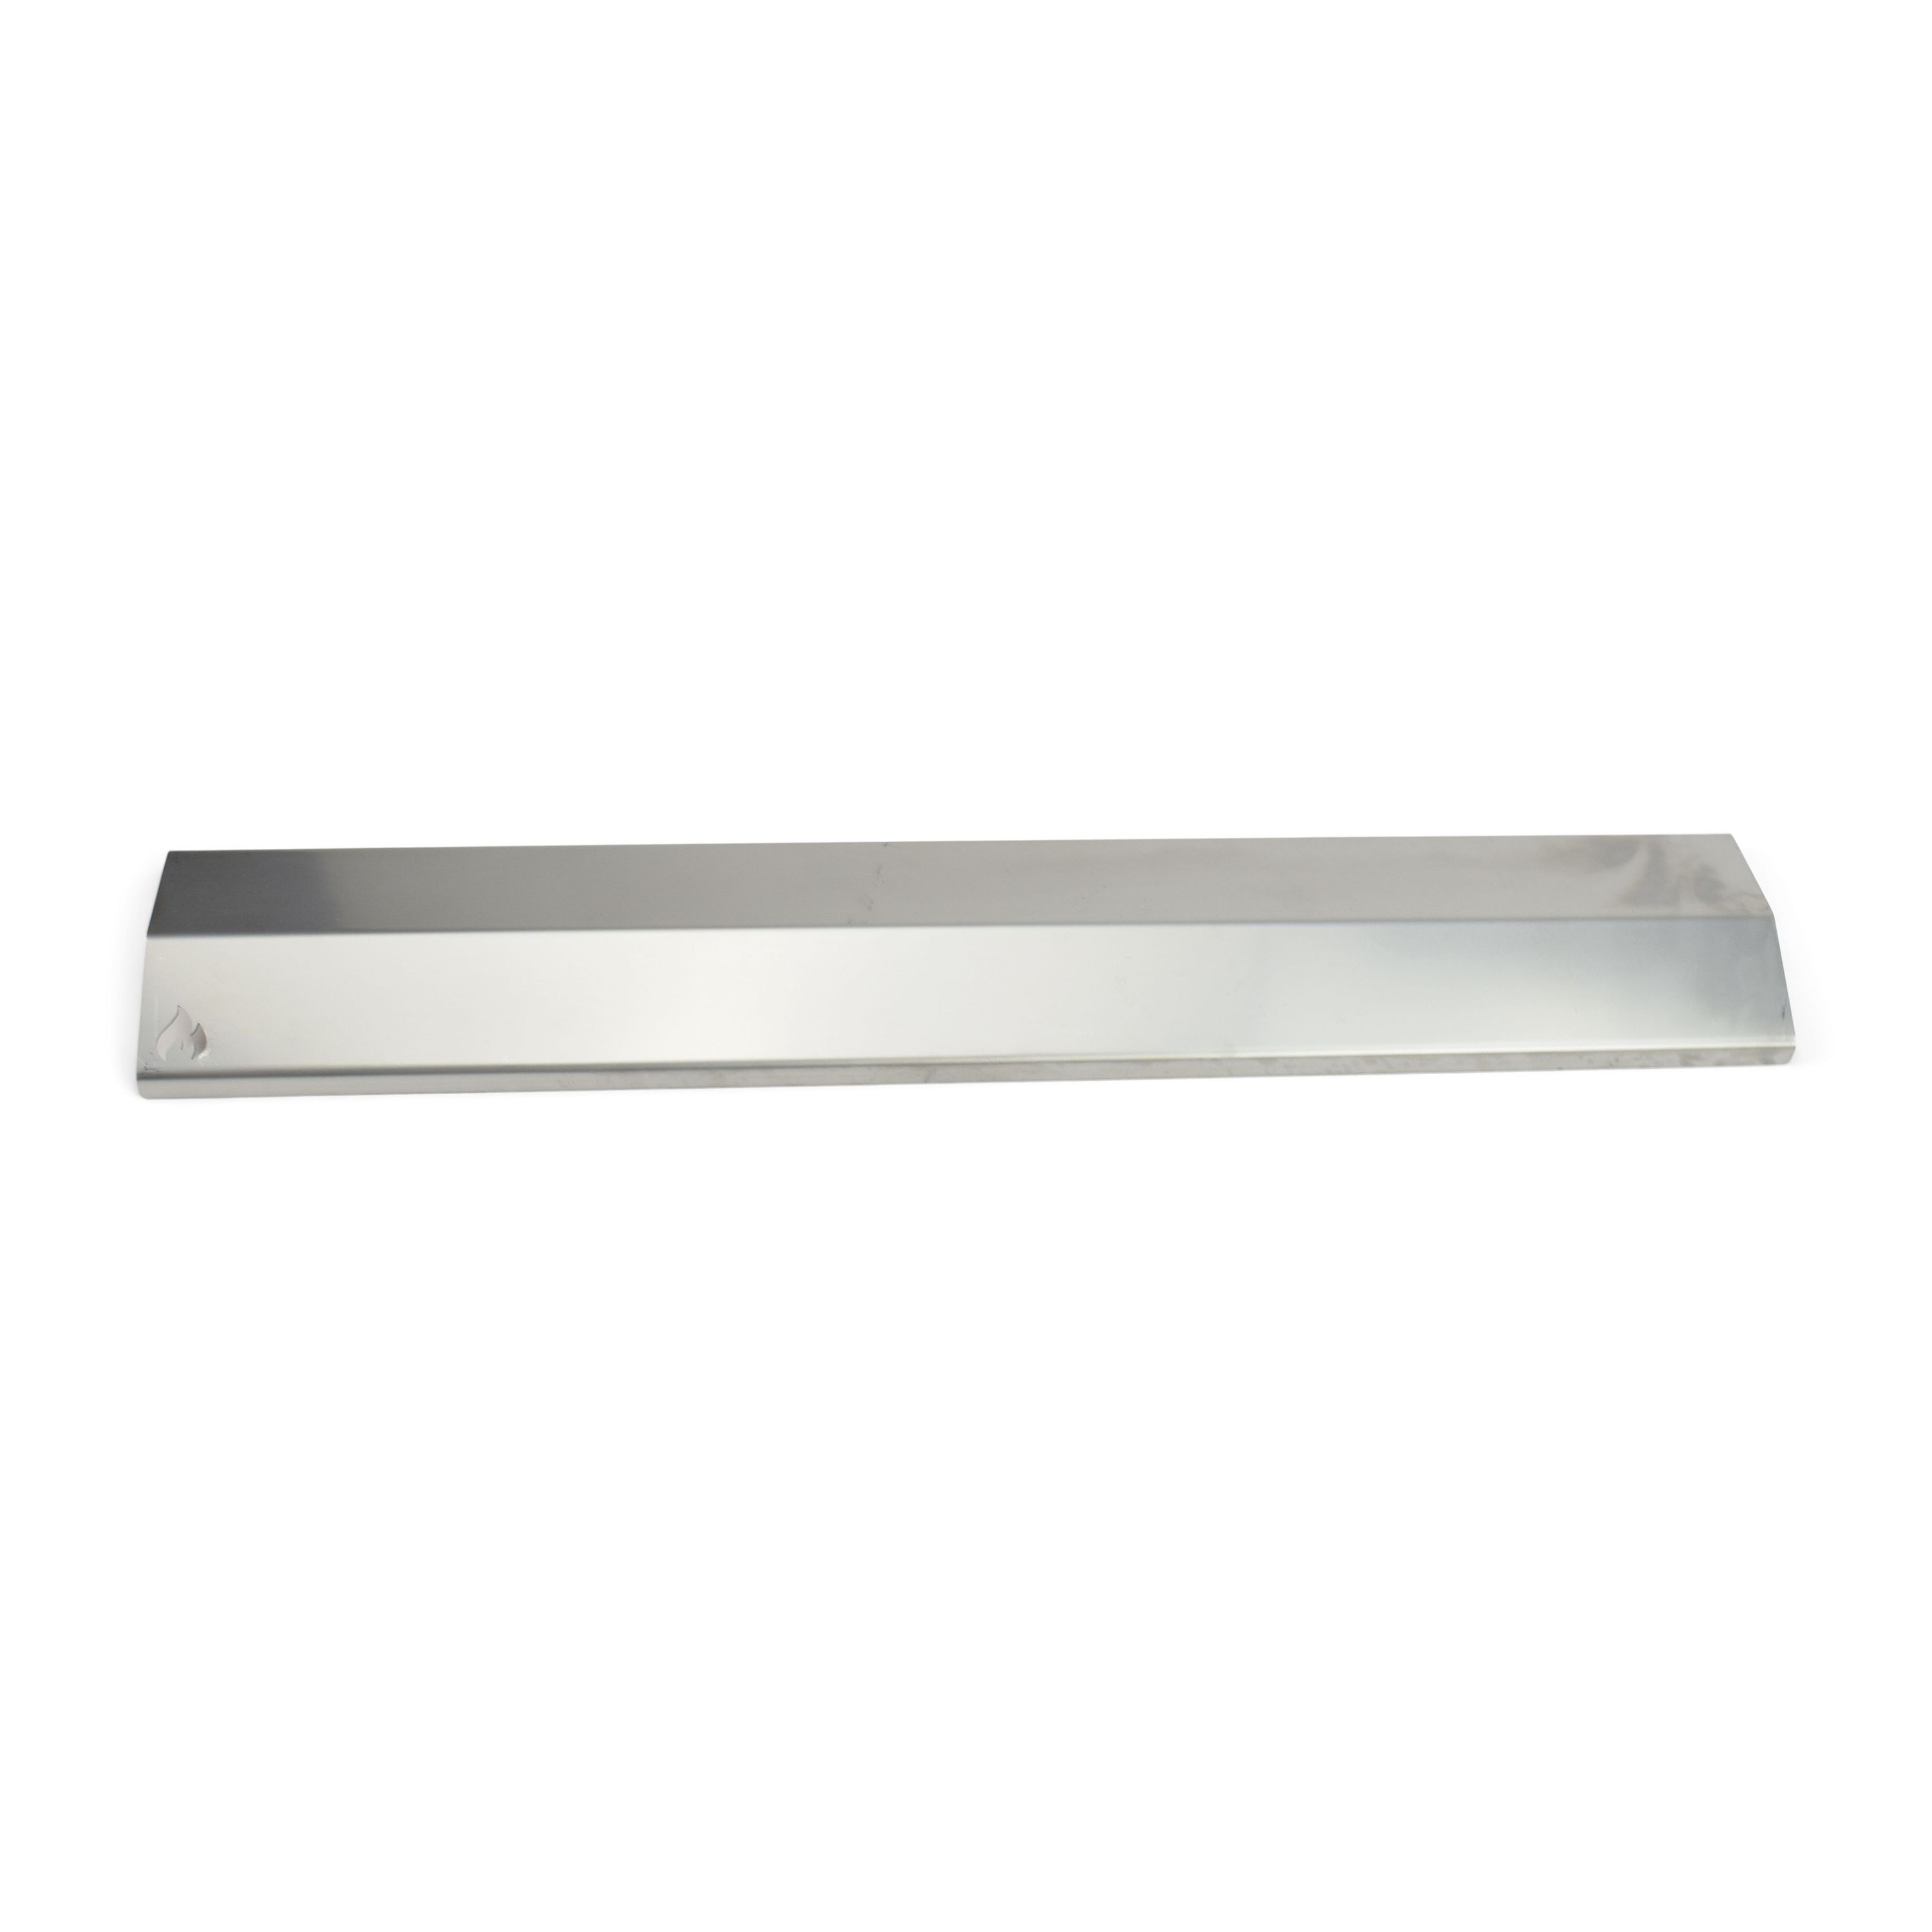 Stainless steel aroma rail for Enders Burner cover for Monroe 2 / 4 / 5 without Simple Clean